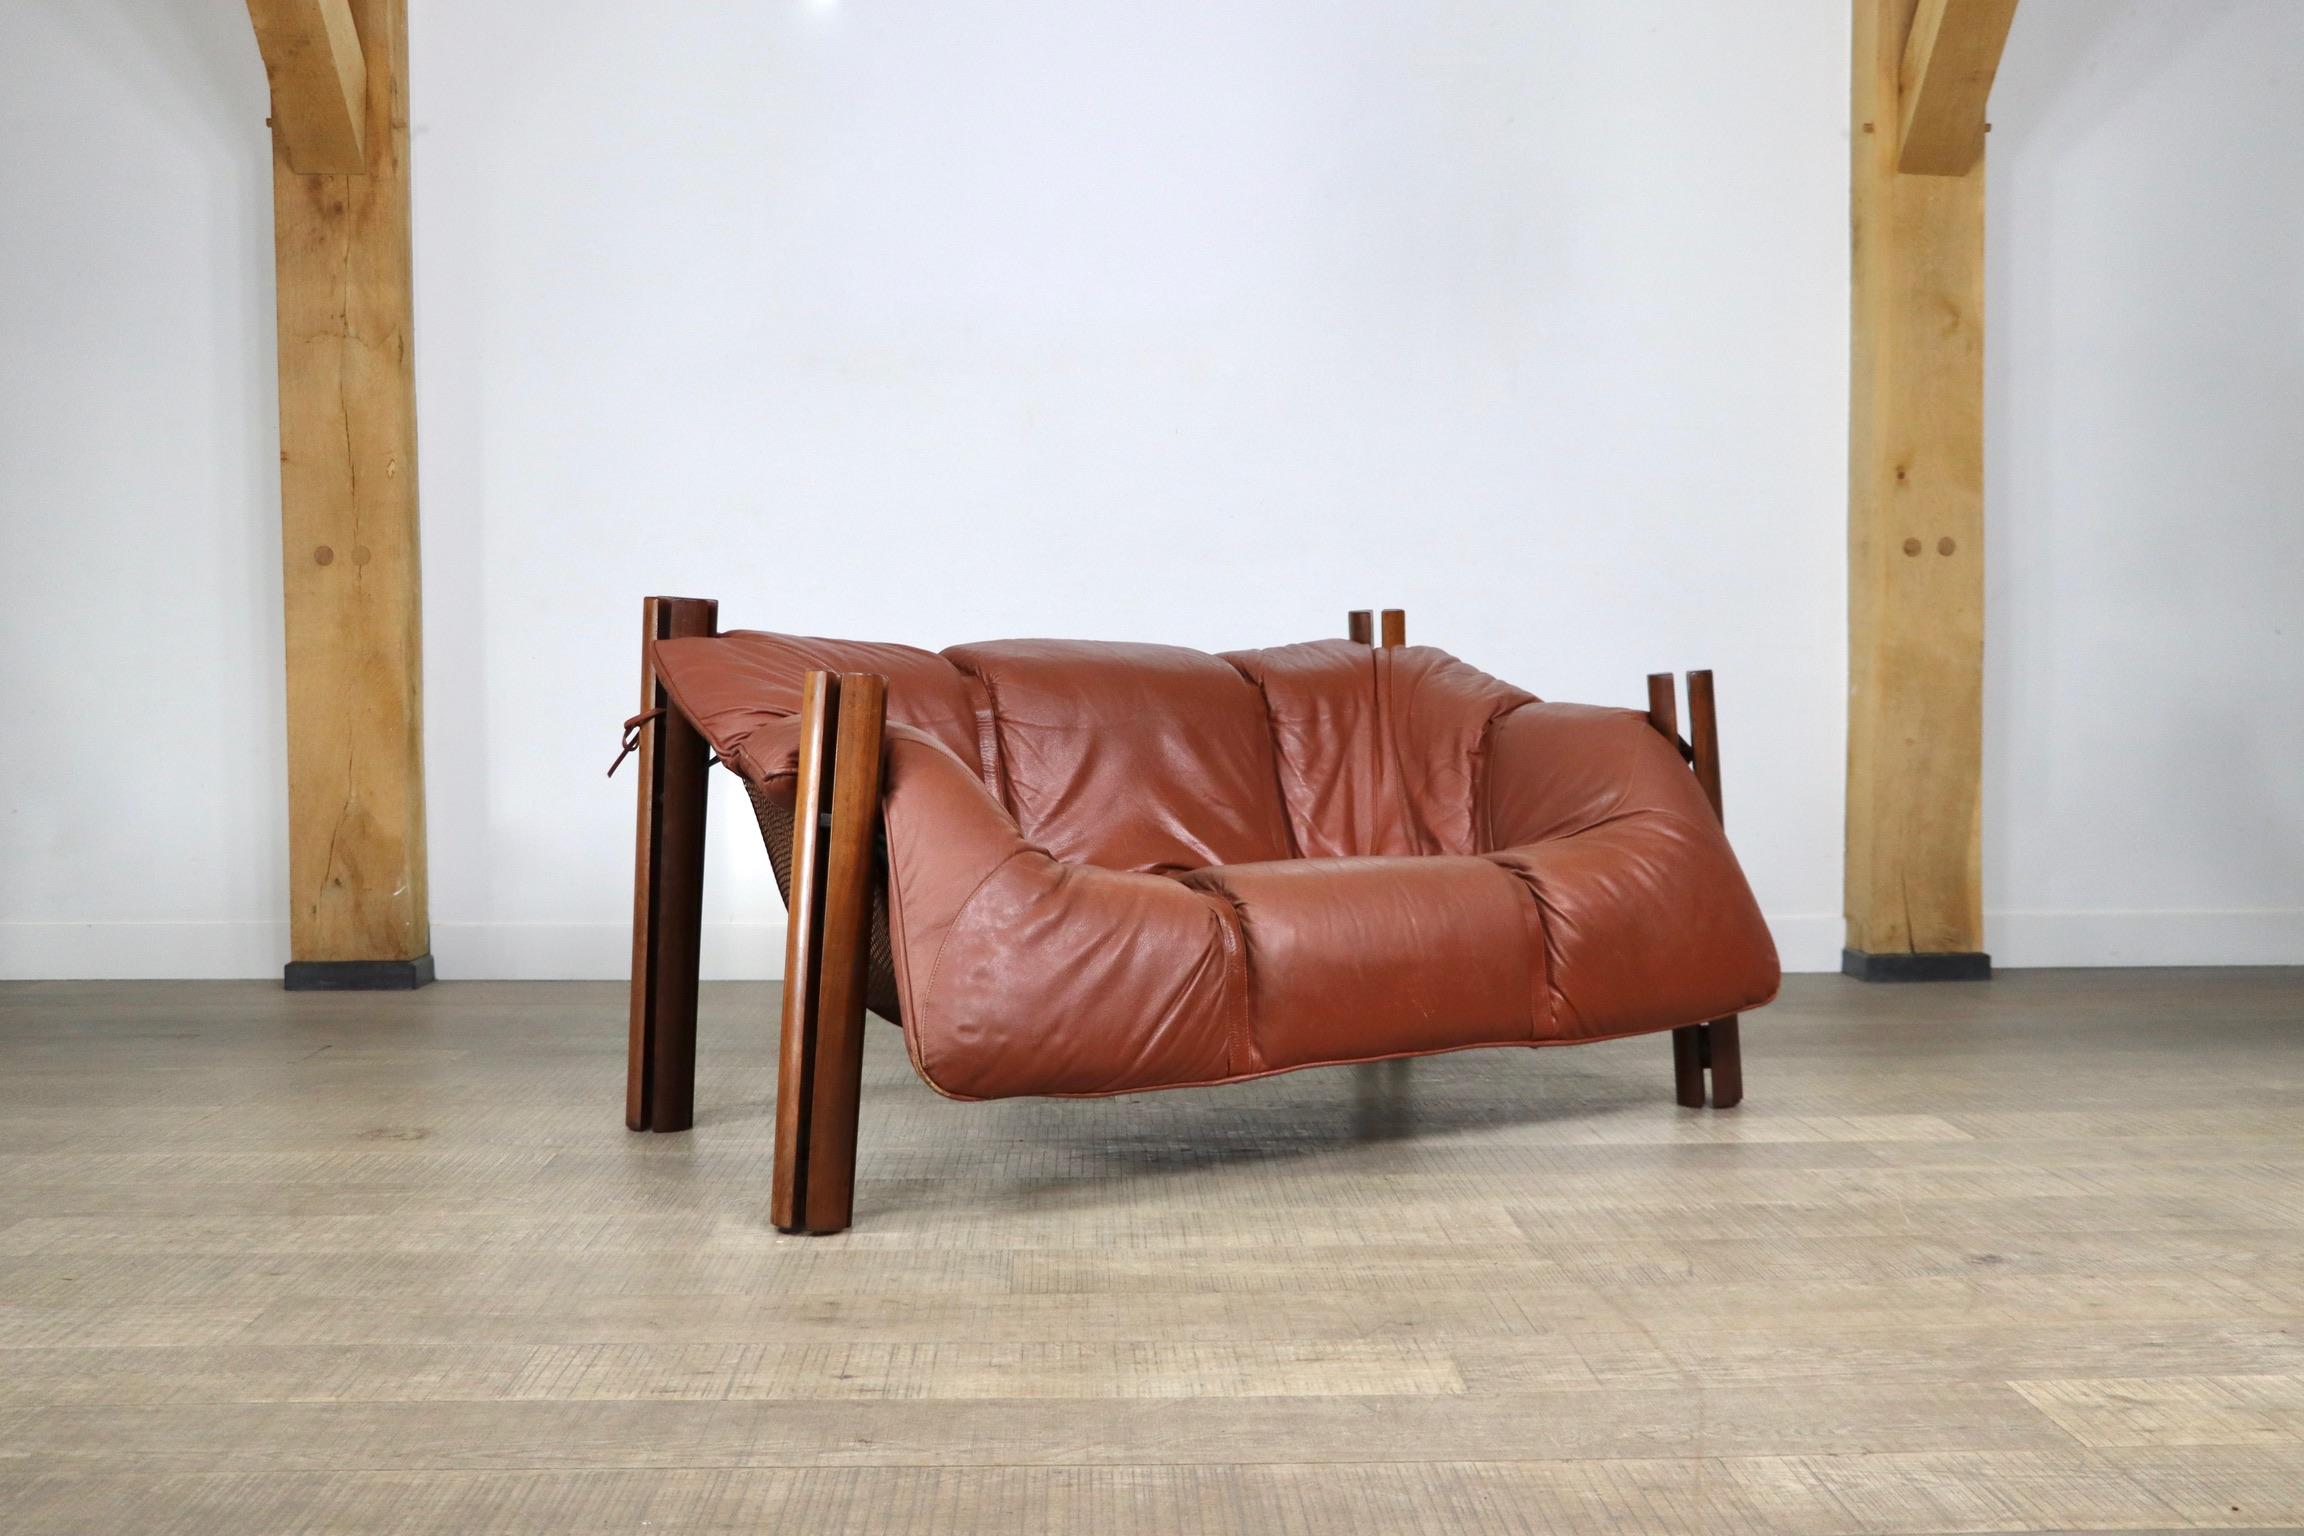 Metal Percival Lafer MP-211 Two Seater Sofa in Cognac Leather, Brasil 1960s